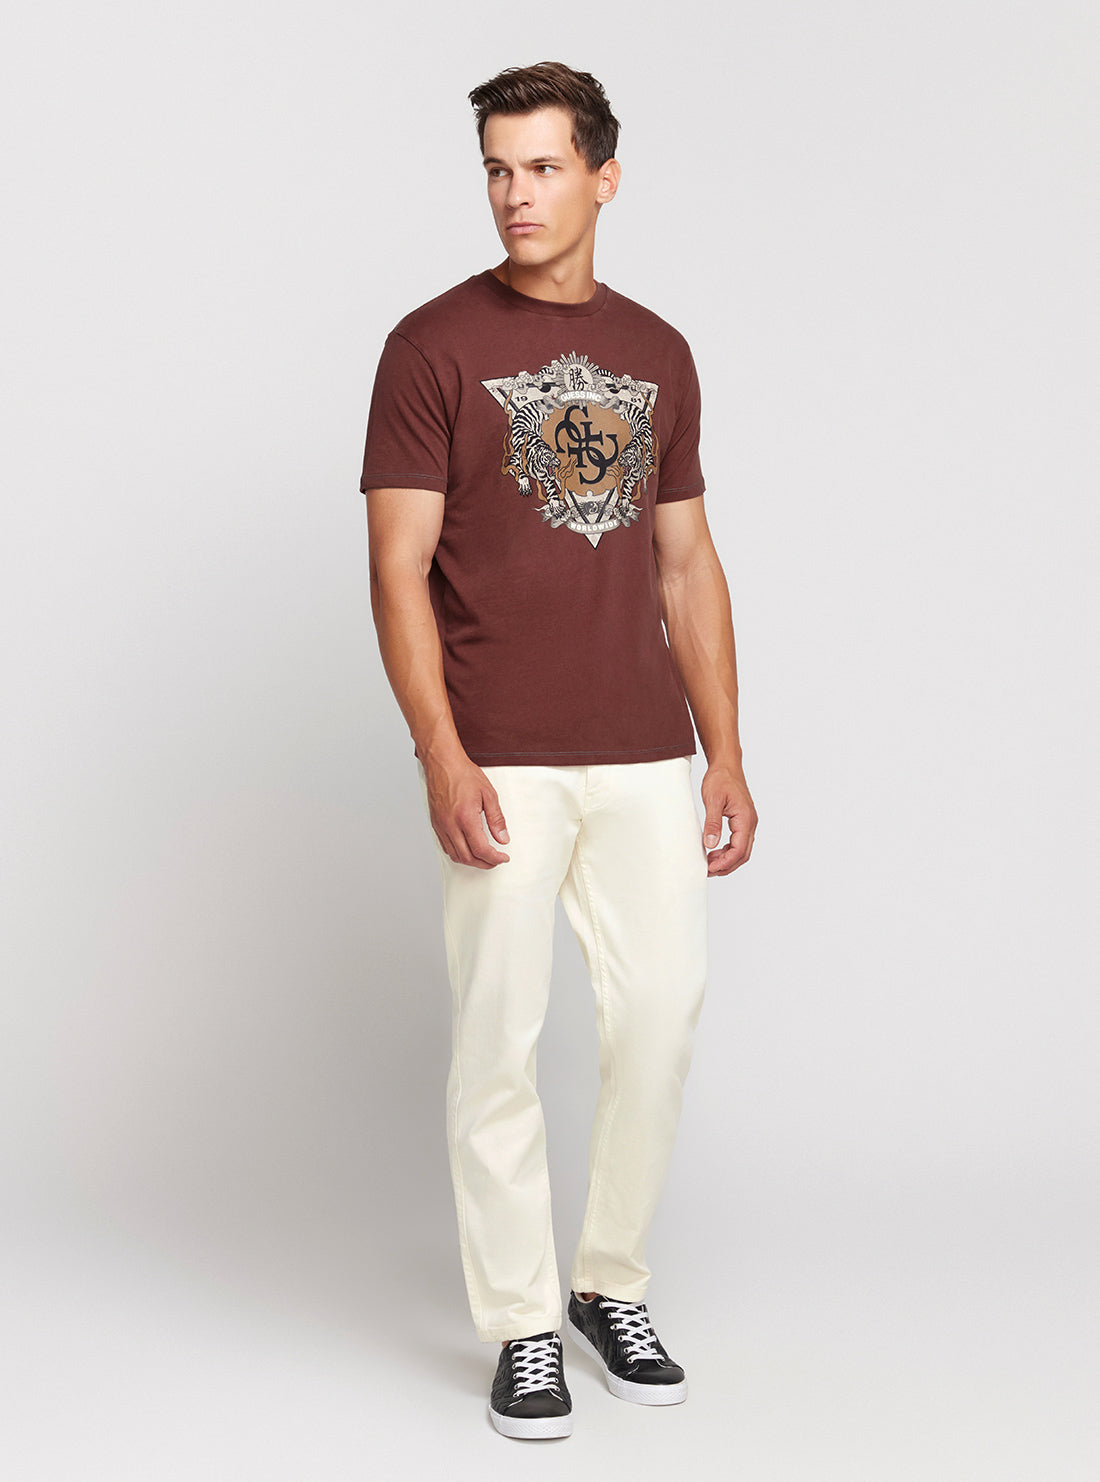 GUESS Eco Brown Short Sleeve T-Shirt full view